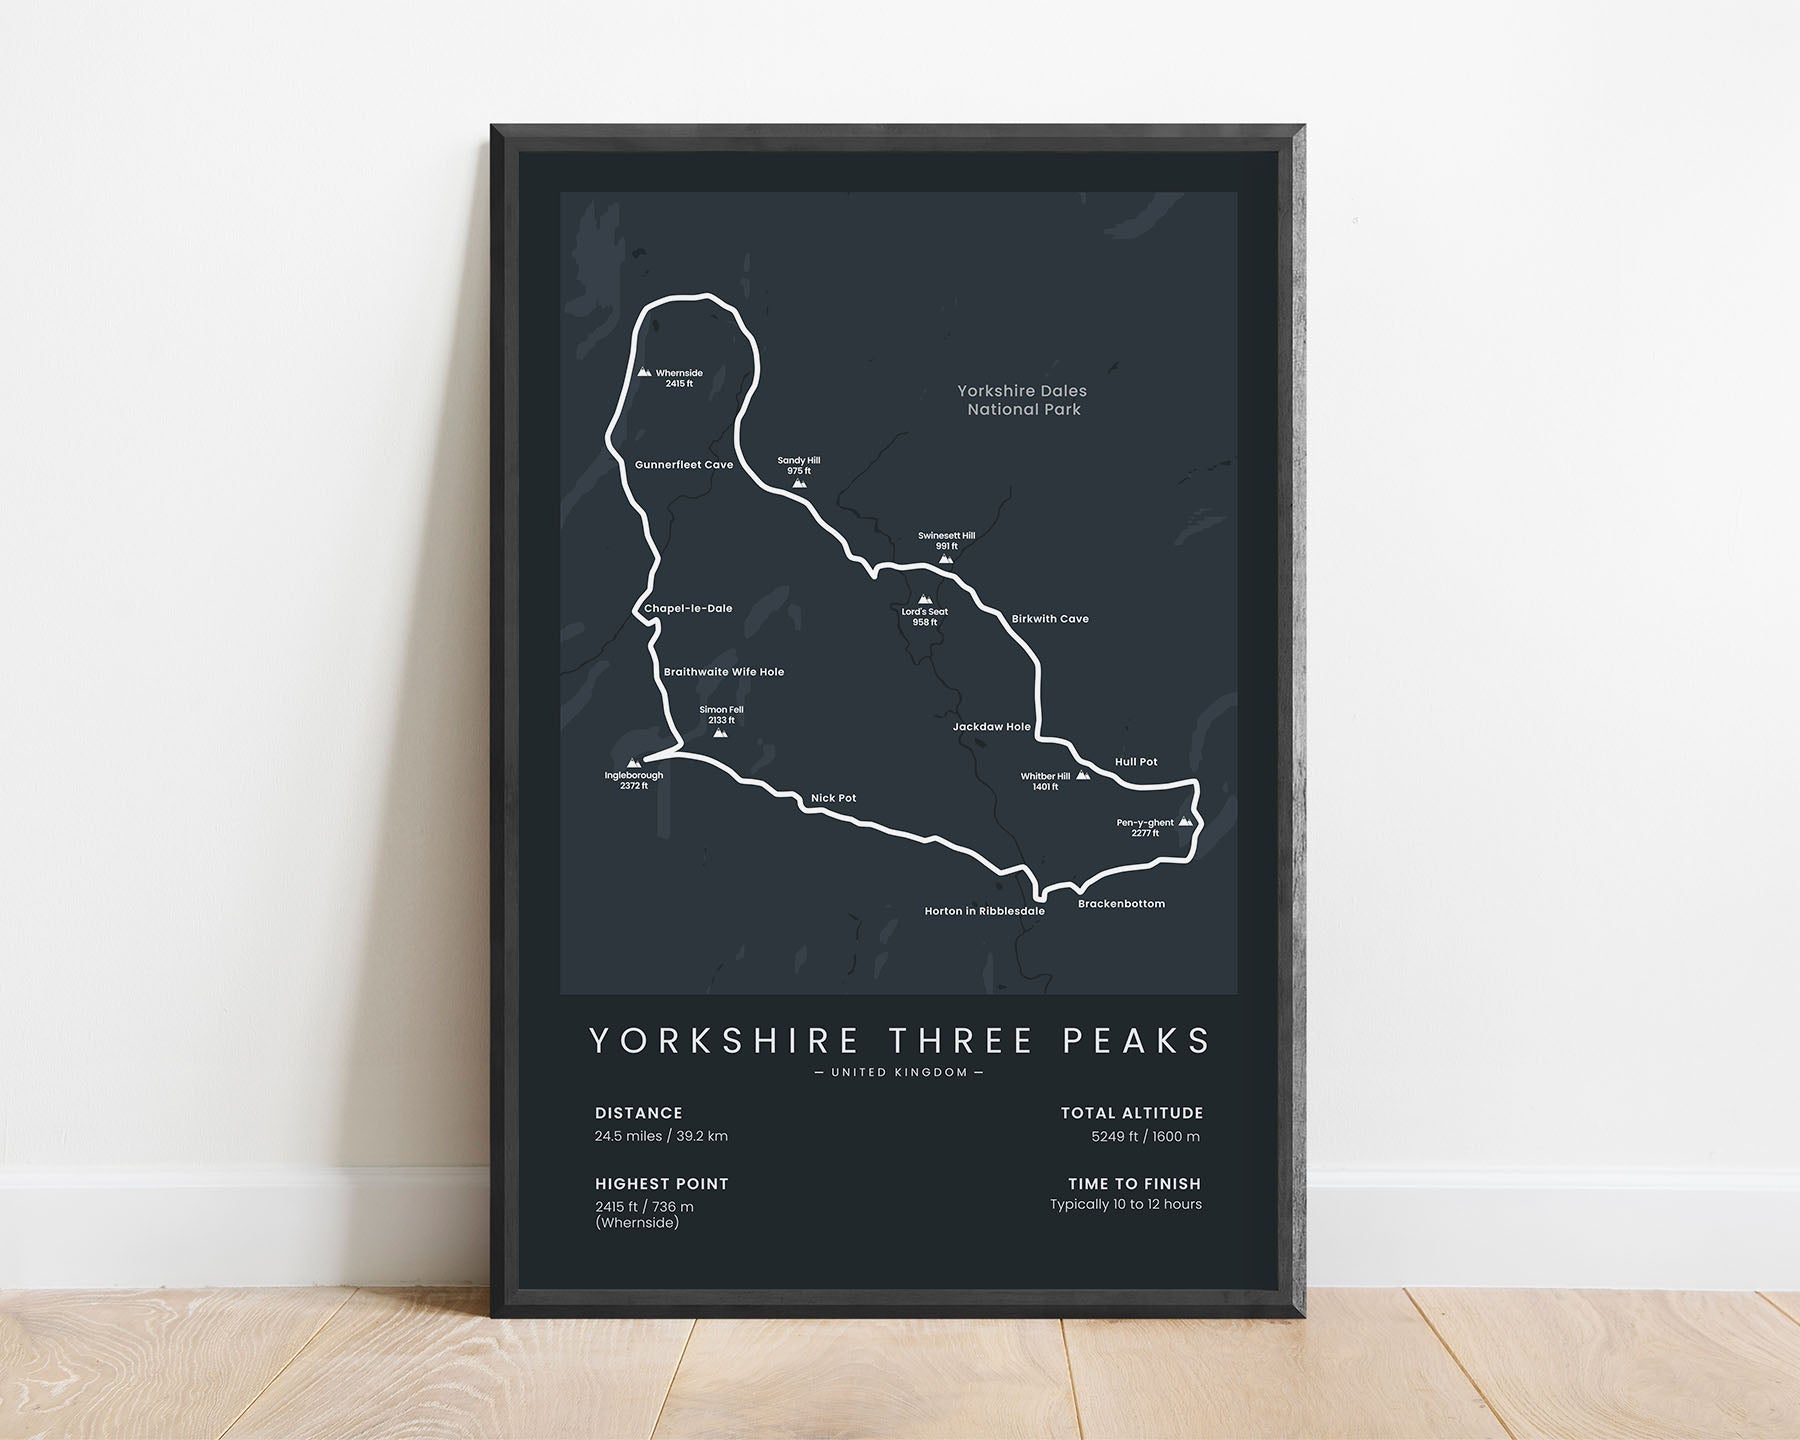 Yorkshire Three Peaks (Pen-y-ghent) track wall map with black background